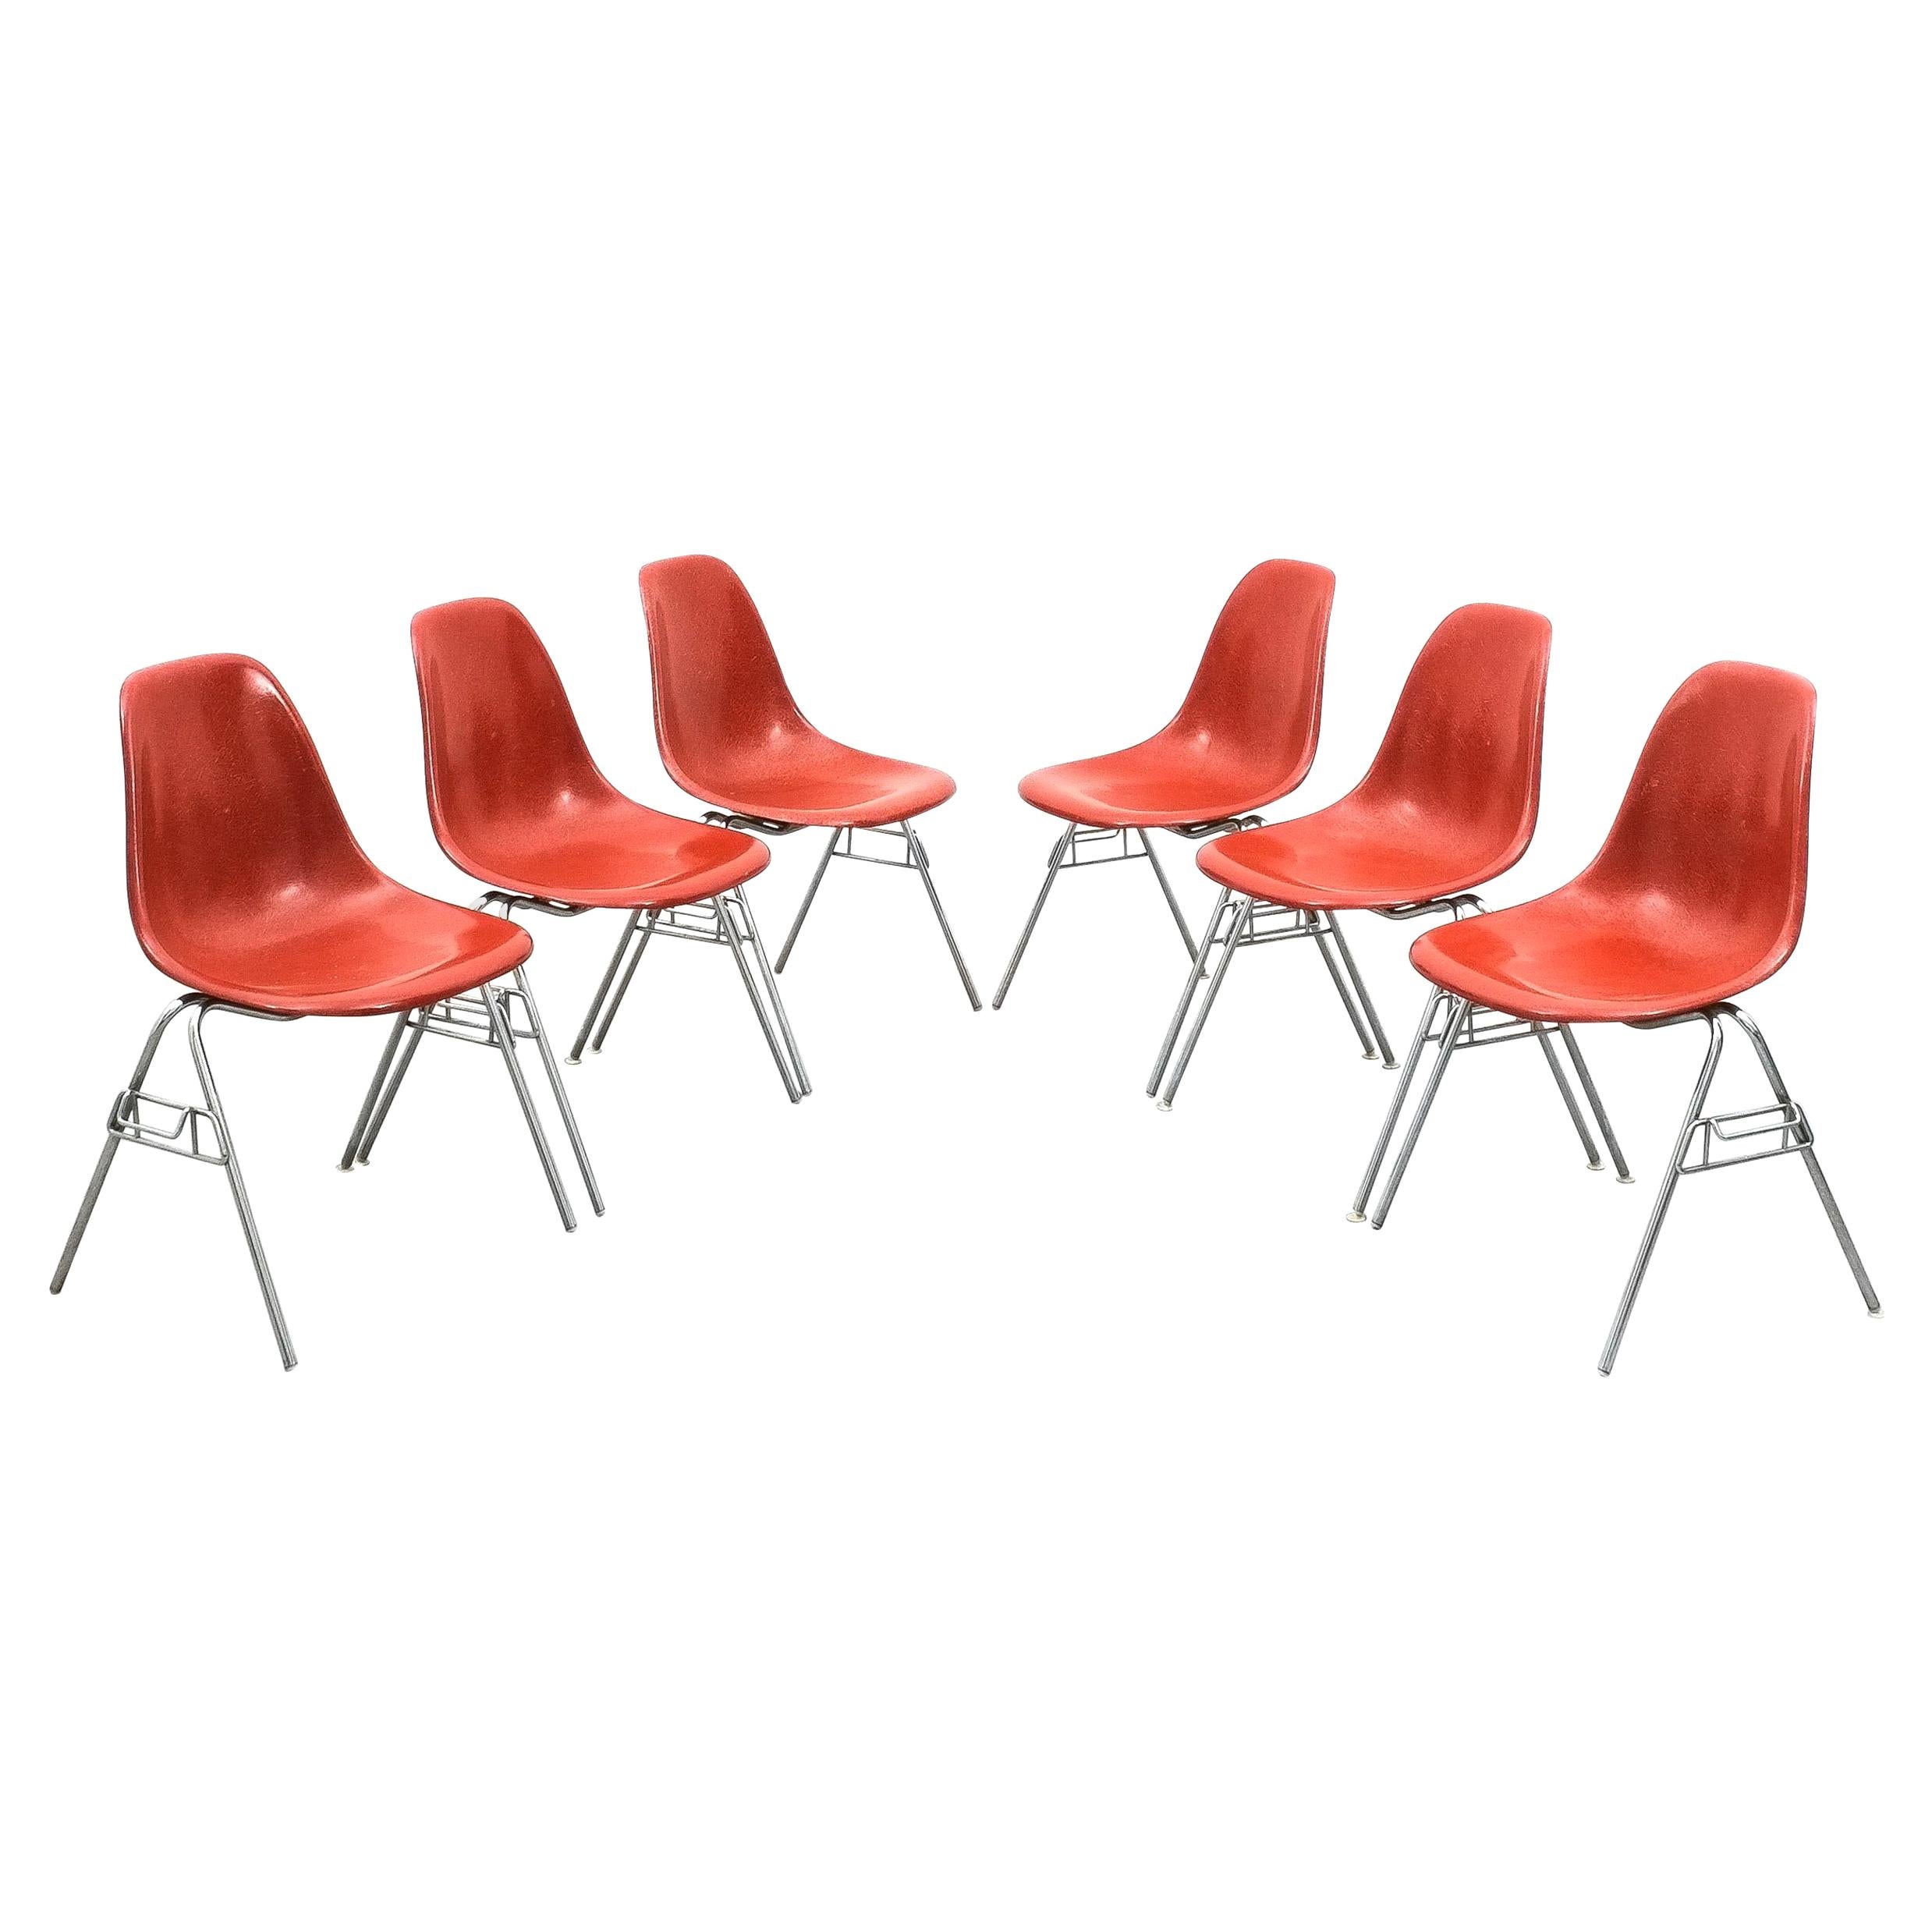 Herman Miller Eames Dining Chairs Terracotta, circa 1970